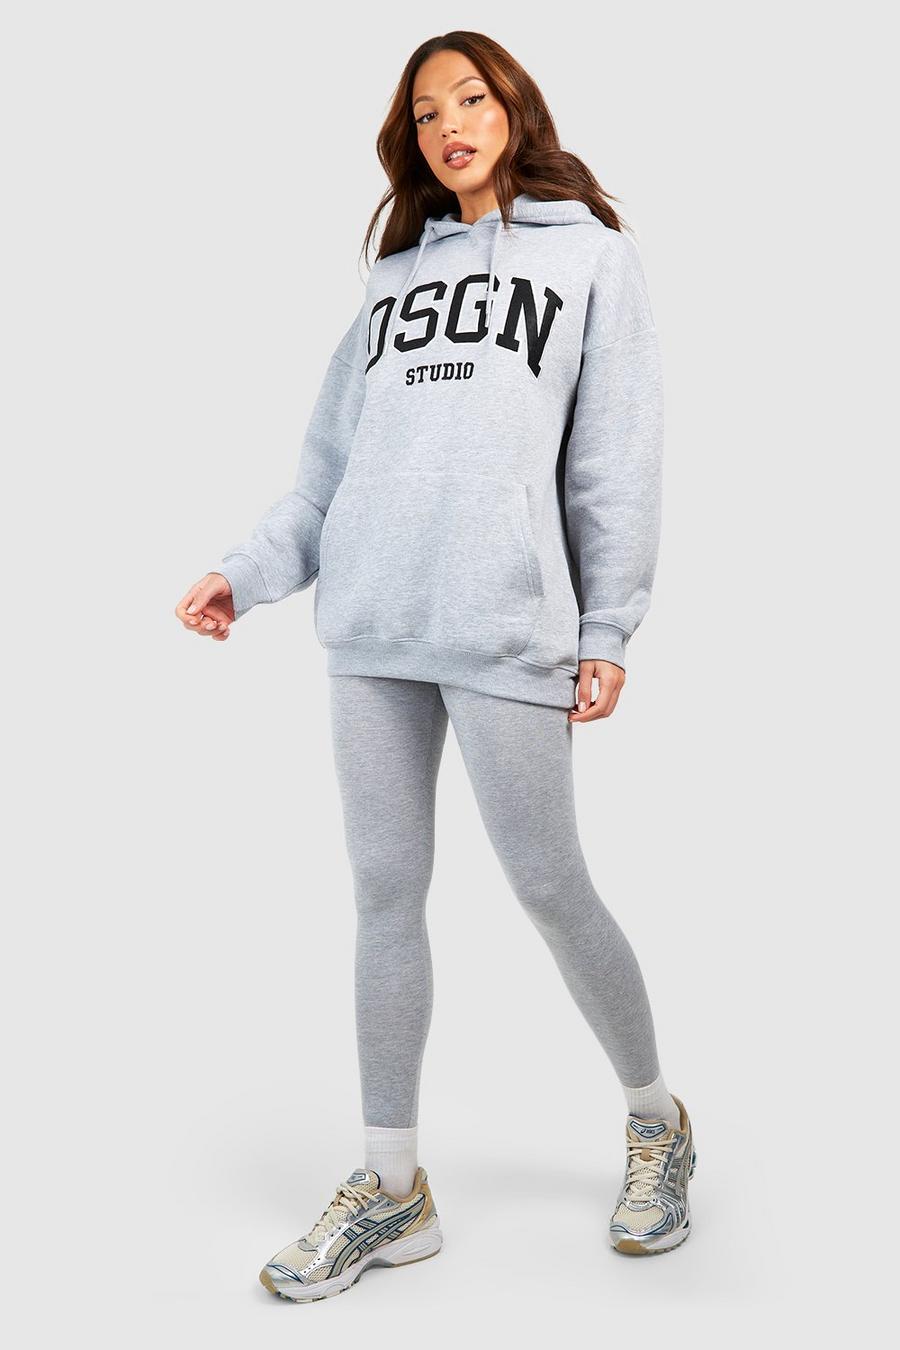 Grey marl Tall Dsgn Studio Emroidered Hoodie And Legging Set